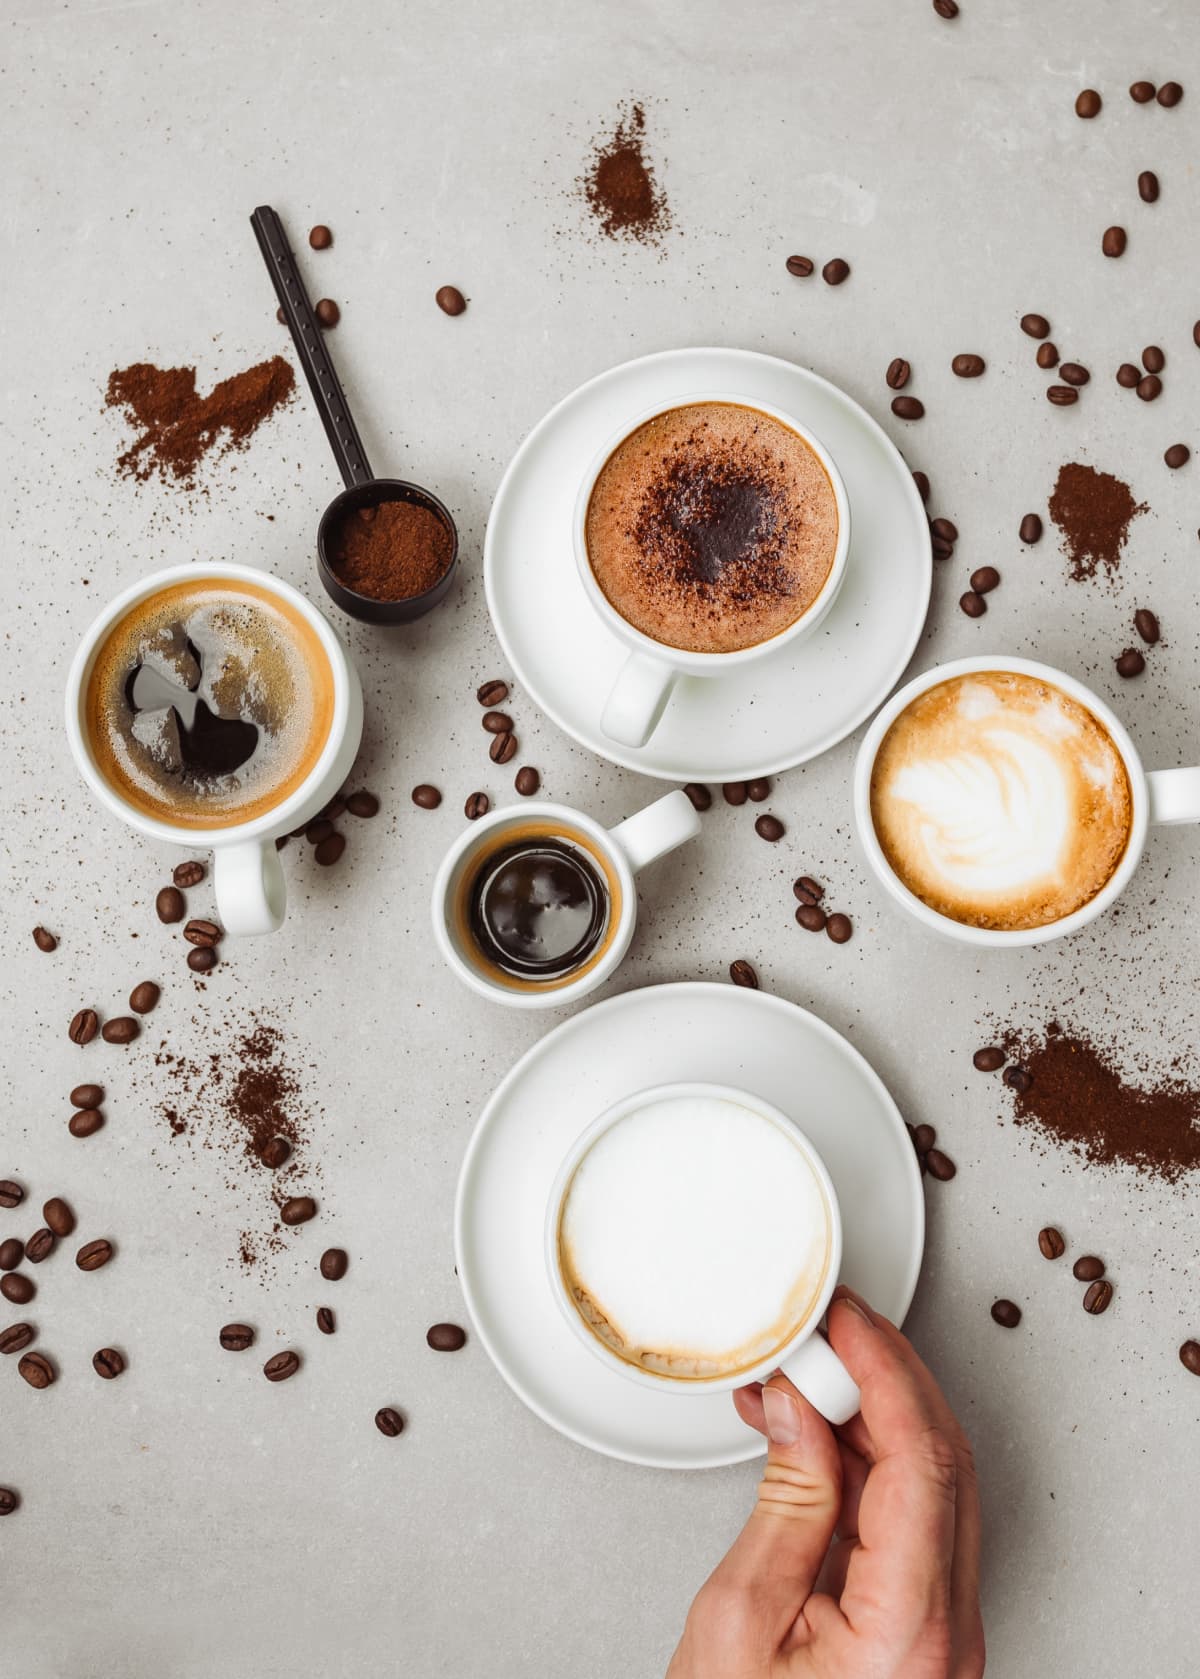 Cropped hand of person holding coffee cup by scattered coffee beans and cocoa powder on table